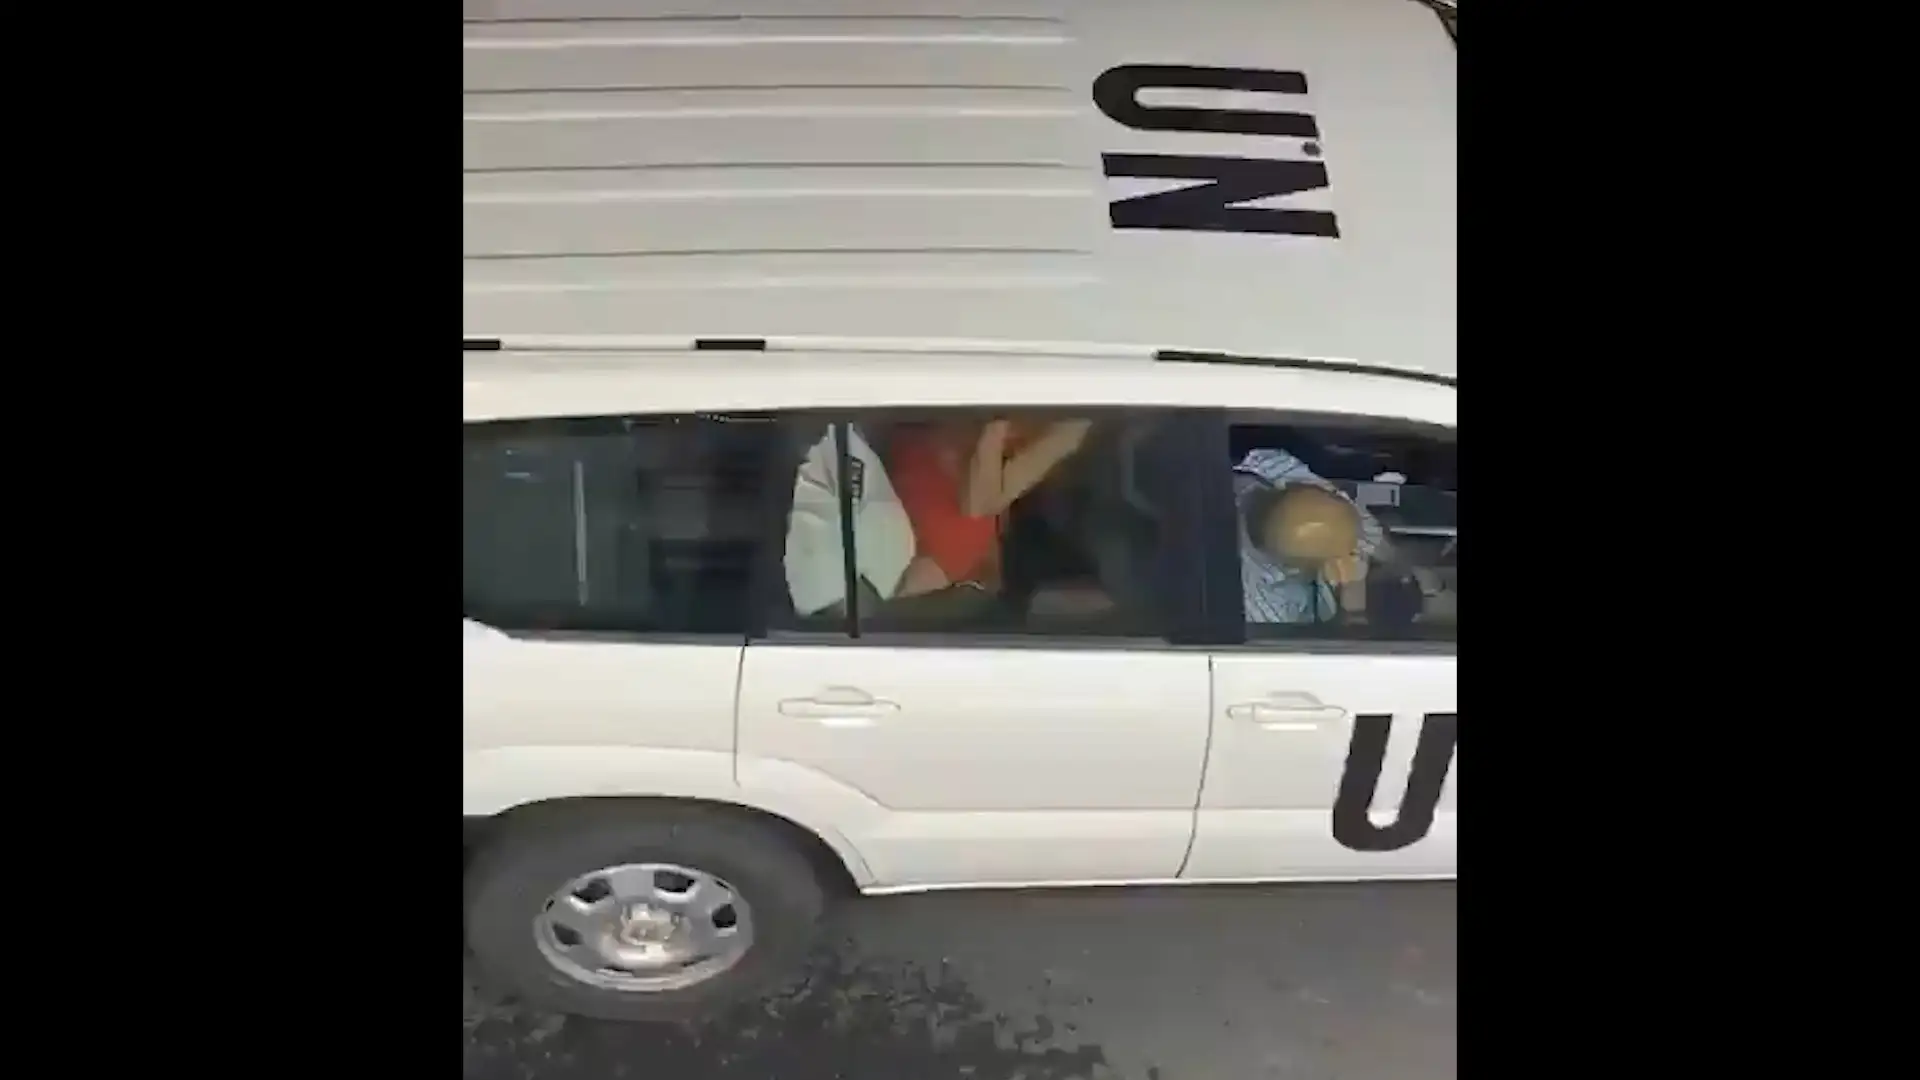 UN says it is ‘deeply disturbed’ by video of couple having sex in its official vehicle (video)